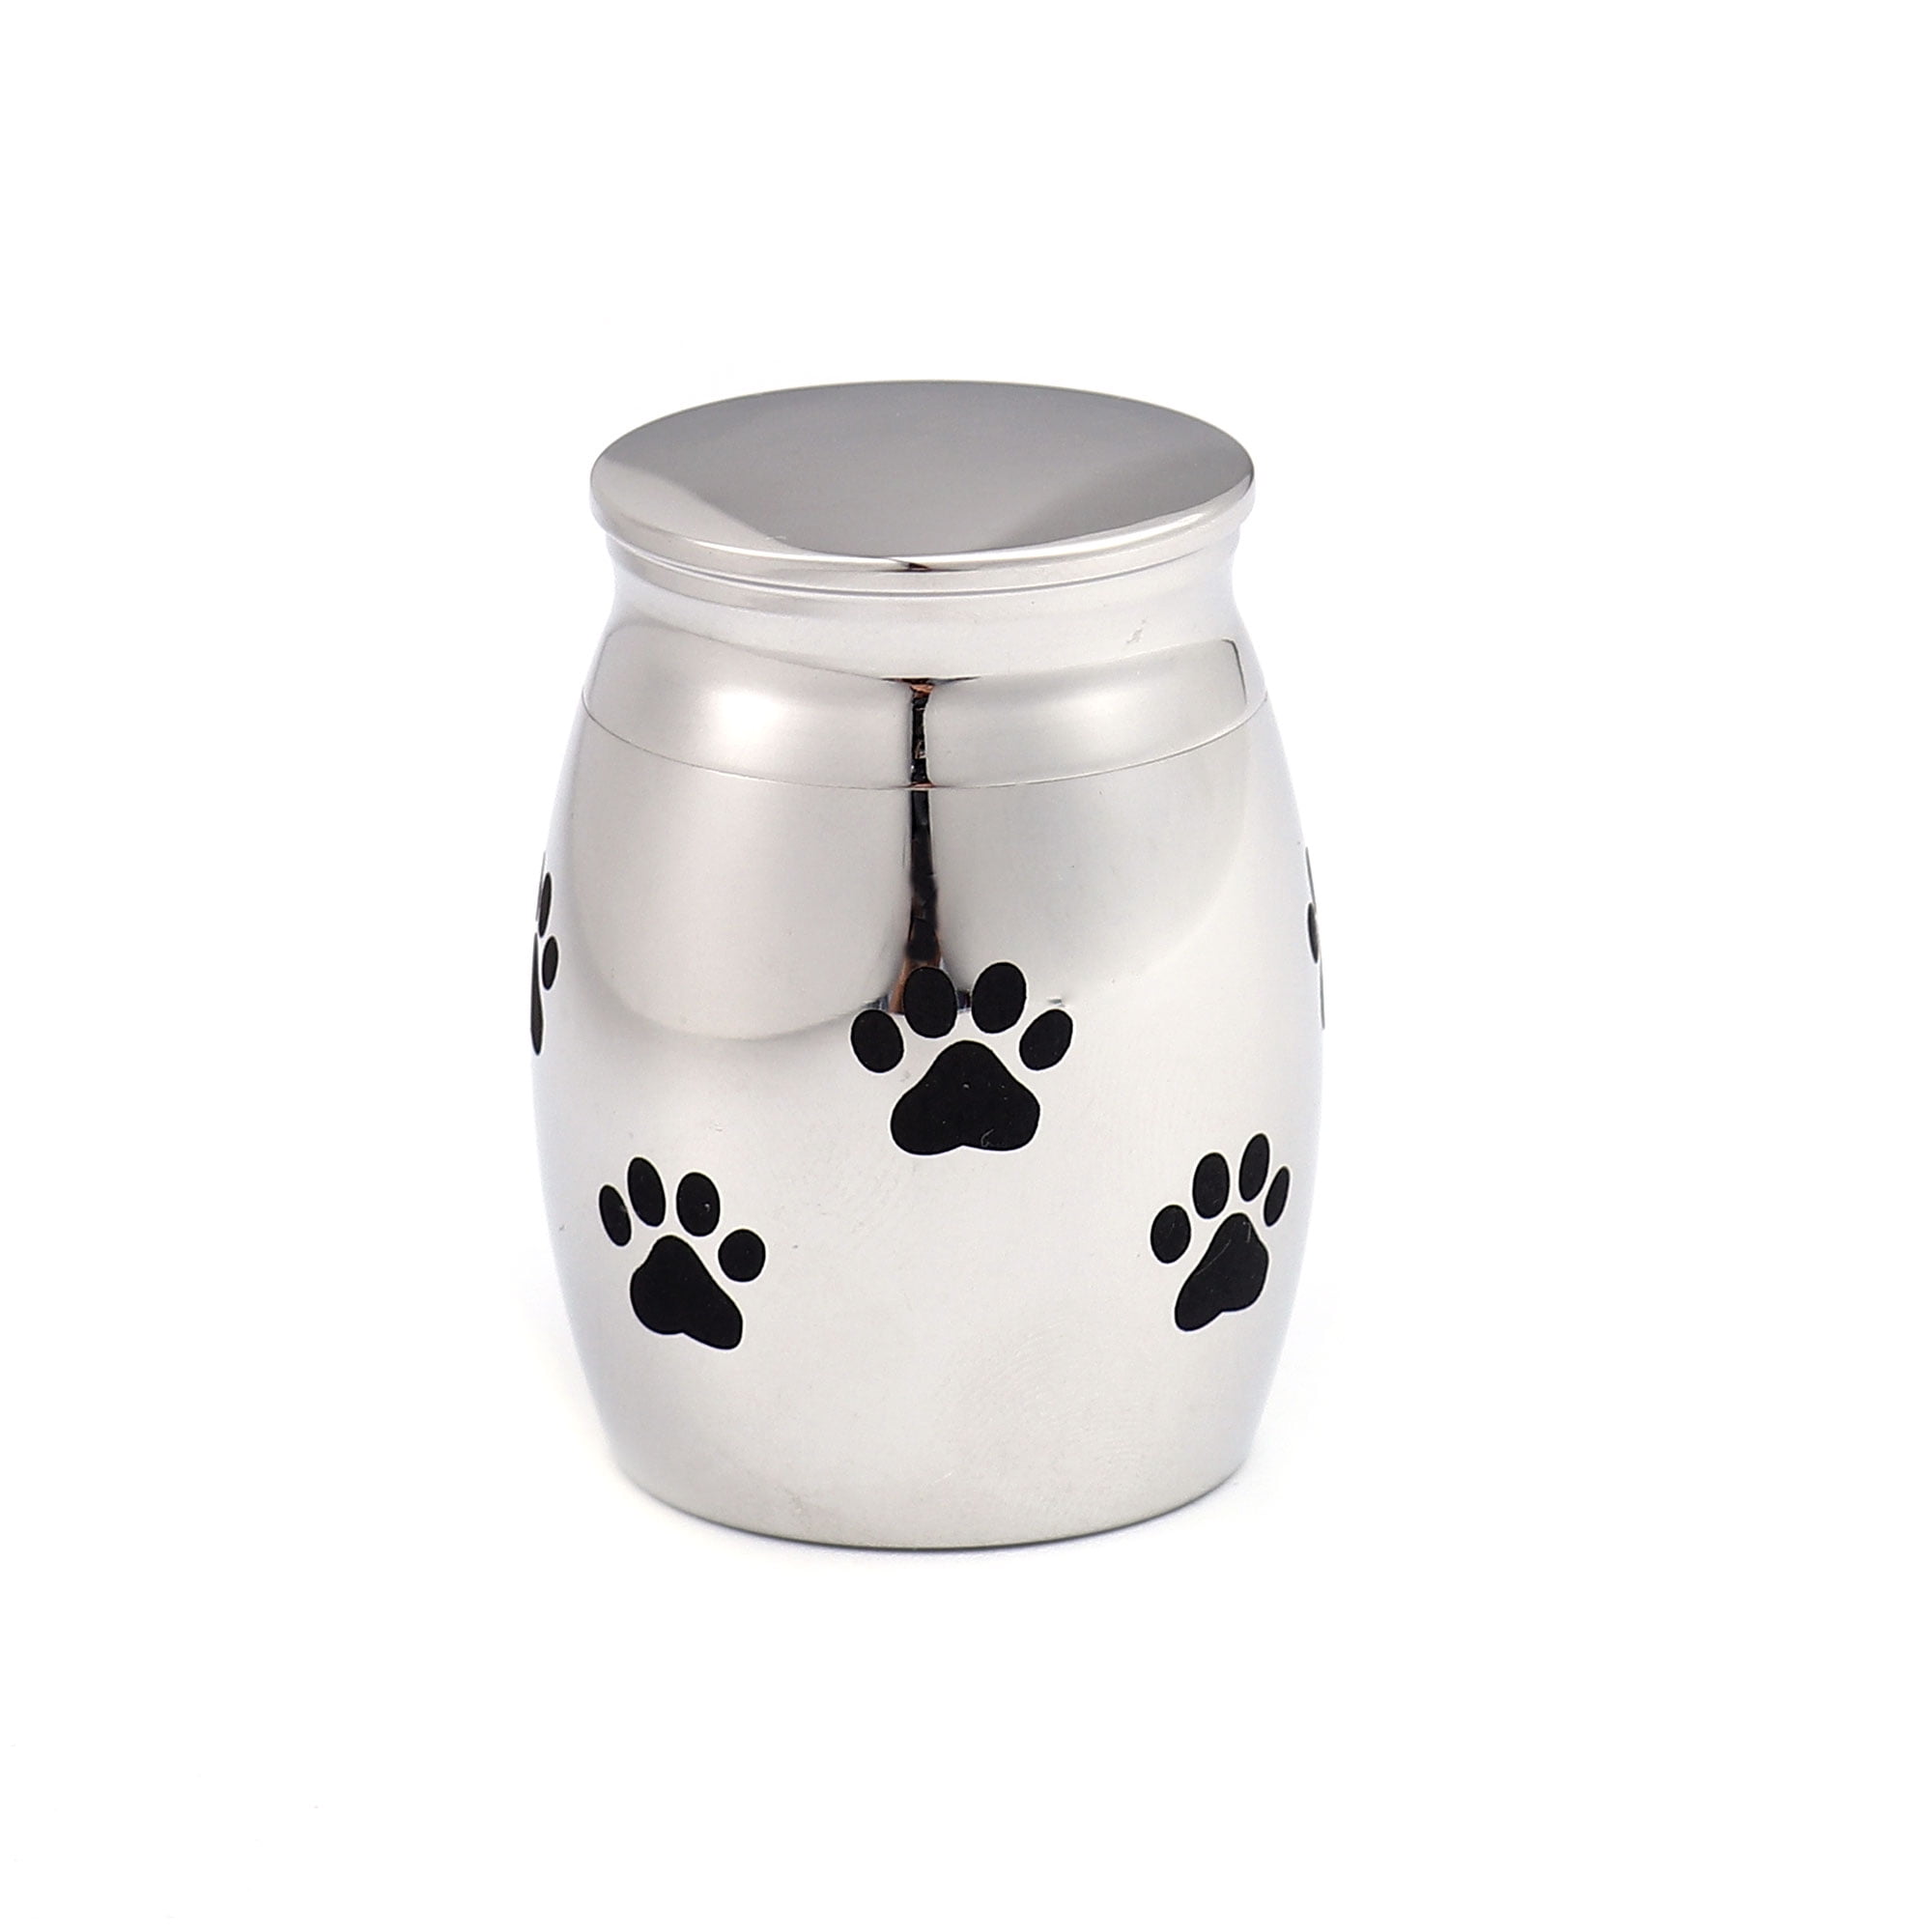 Silver Mini Sized Funeral Pets Ashes Cremation Urns for Dog Cat Keepsake Stainless Steel Warterproof Paw Pet Memorial Ash Container with Free Anavia Pouch - Walmart.com